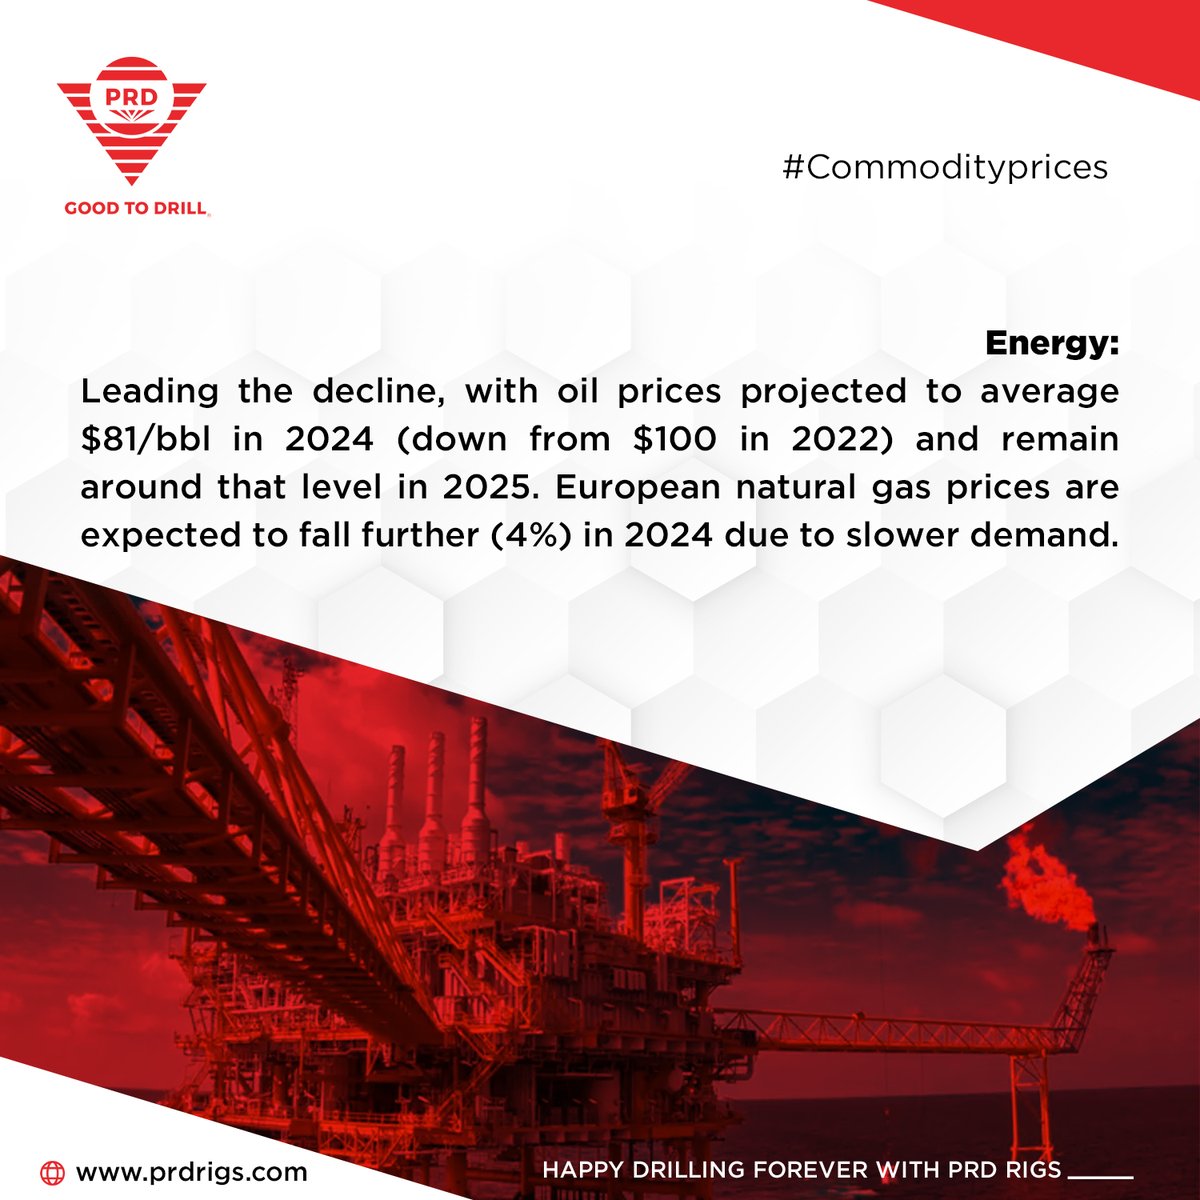 Energy Update: Oil prices on the decline, projected to average $81/bbl in 2024, down from $100 in 2022. Meanwhile, European natural gas prices are expected to decrease by 4% in 2024 due to sluggish demand. 

Stay informed! 

 #EnergyMarket #OilPrices #NaturalGas #Commodity  #prd